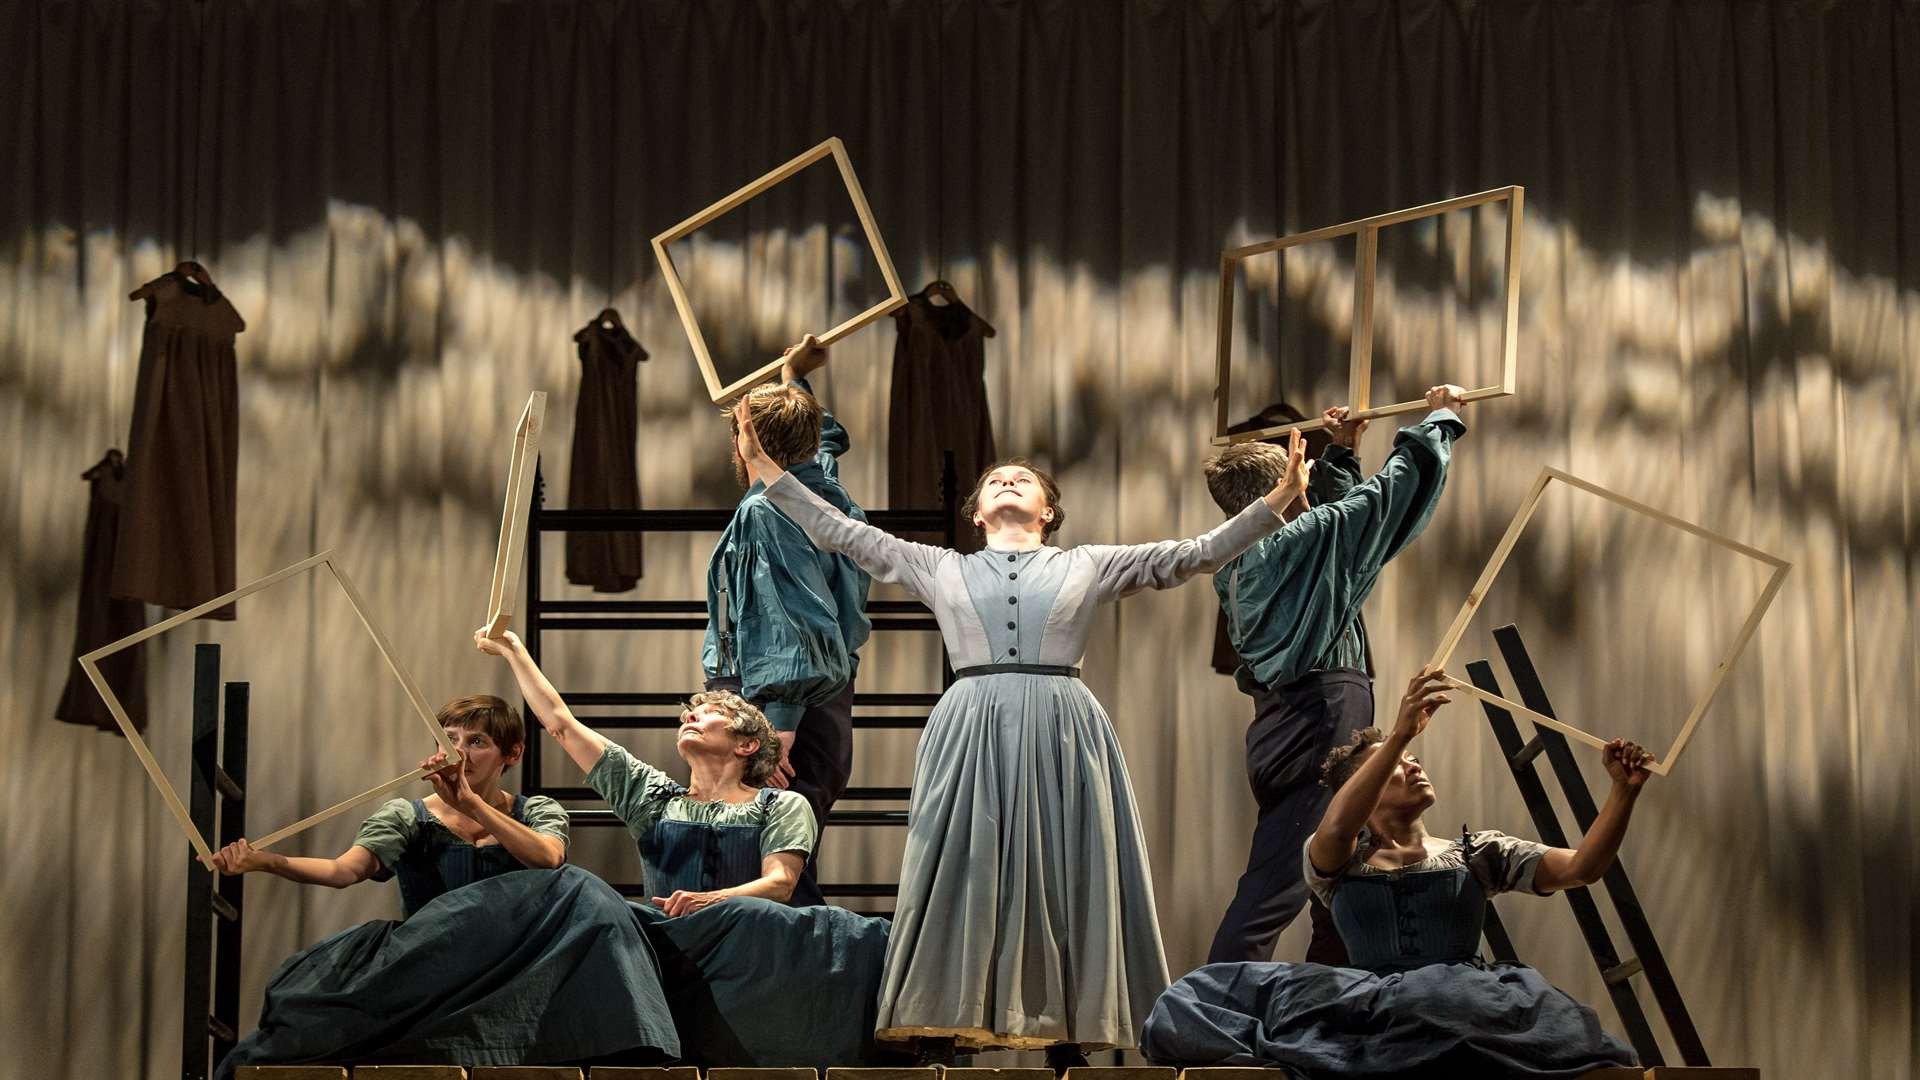 The National Theatre's production of Jane Eyre has a contemporary set